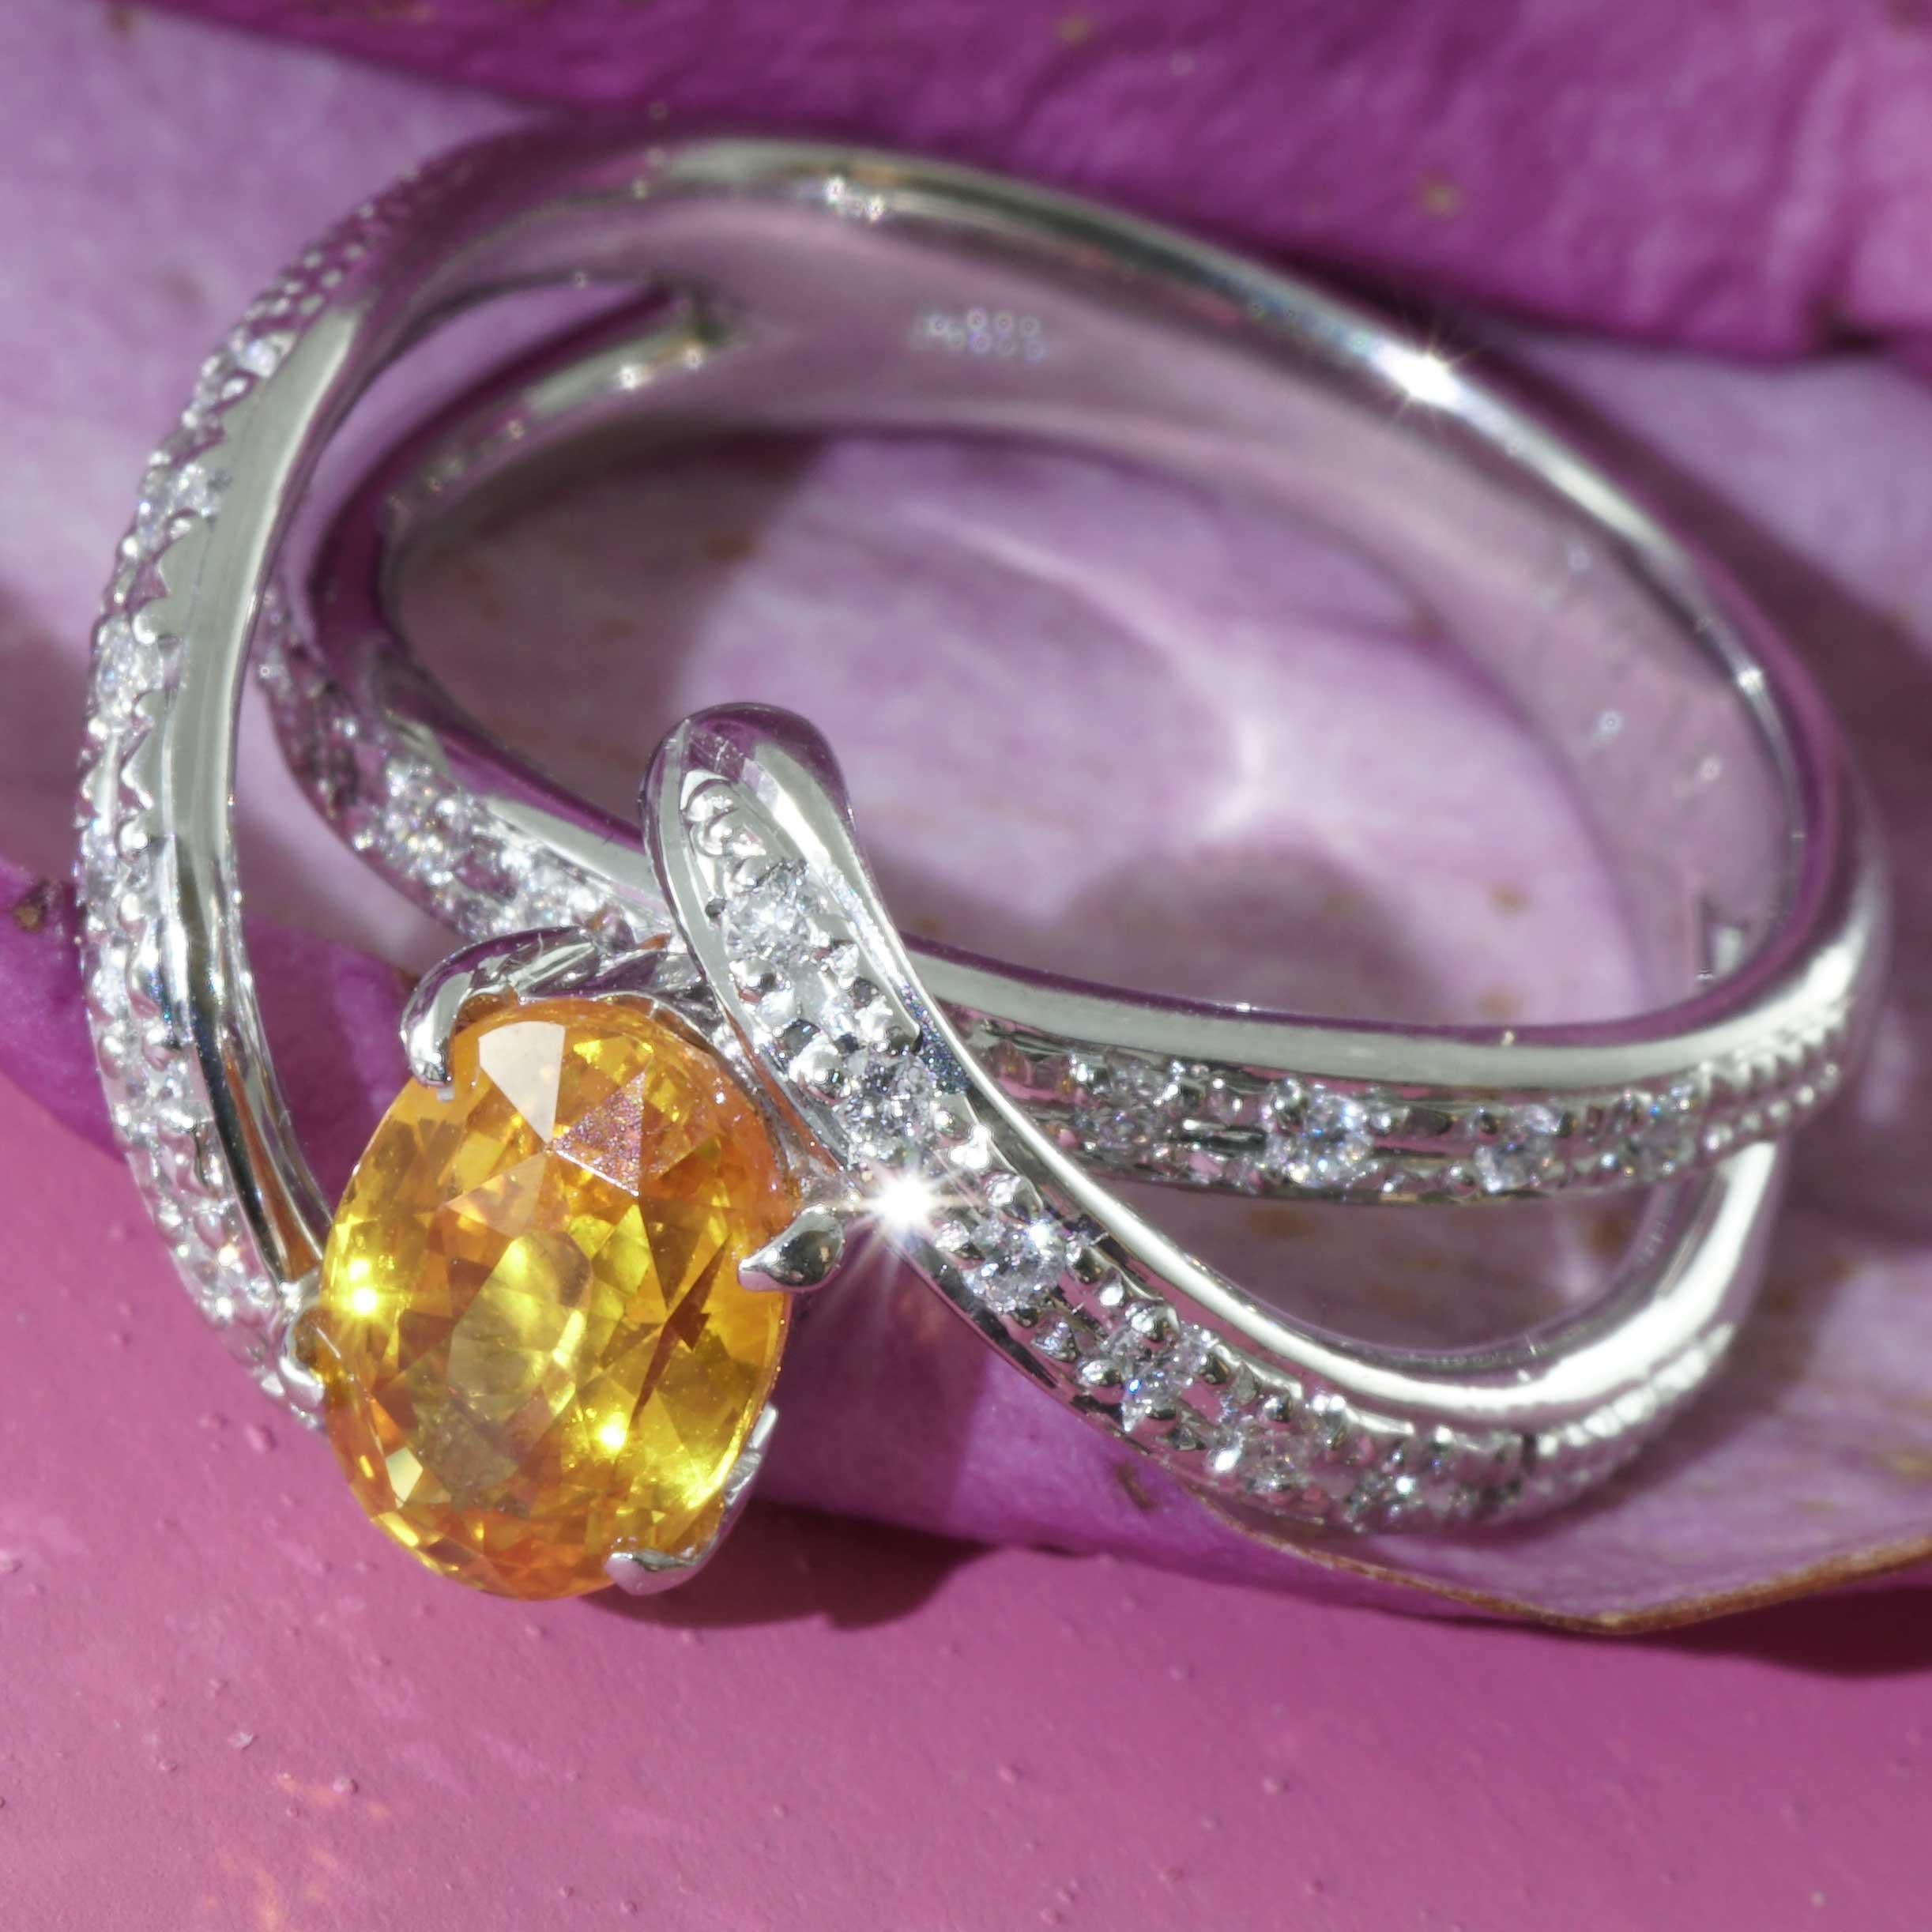  with a wonderful symbolic color (yellow stands for wealth), very lively charisma, a sapphire oval cut approx. 1.612 ct, purity, color distribution and brilliance very good, full cut diamonds total approx. 0.16 ct, W (white) / VS (very small